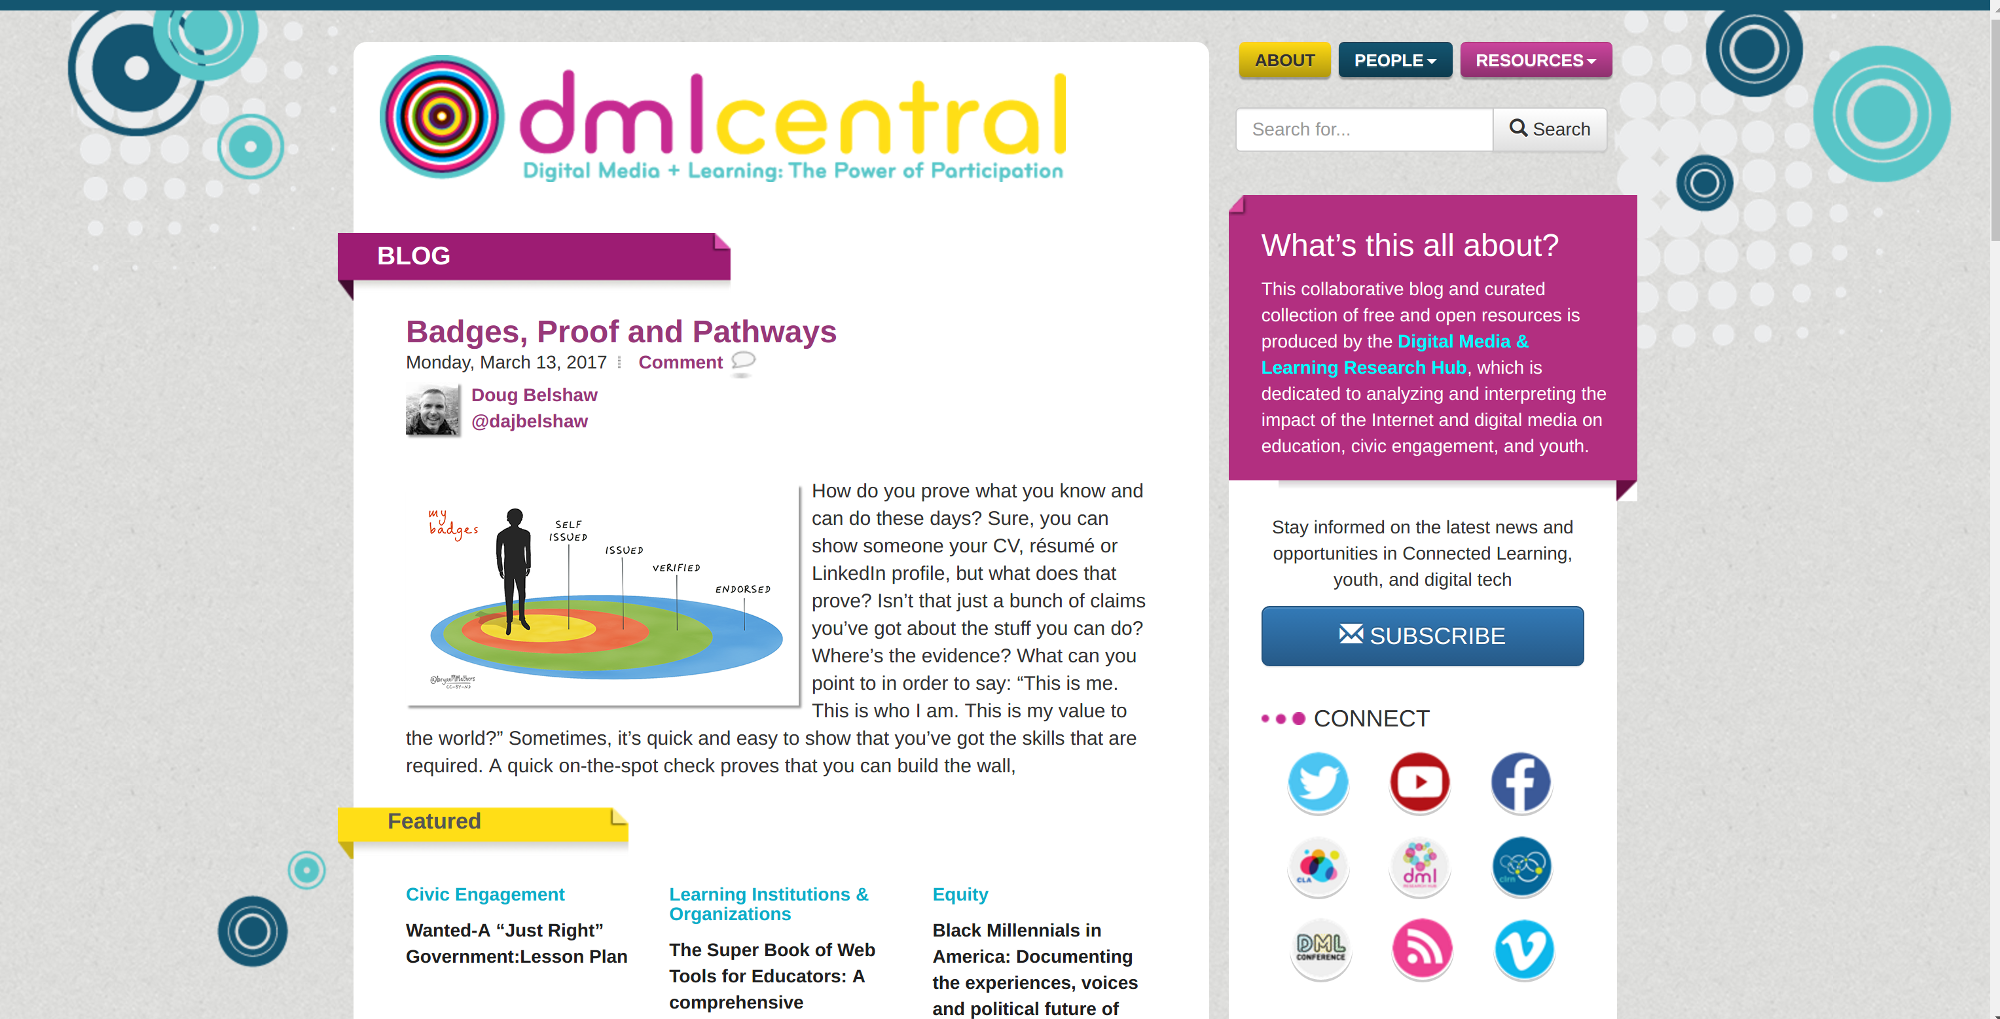 Badges, Proof and Pathways [DML Central]